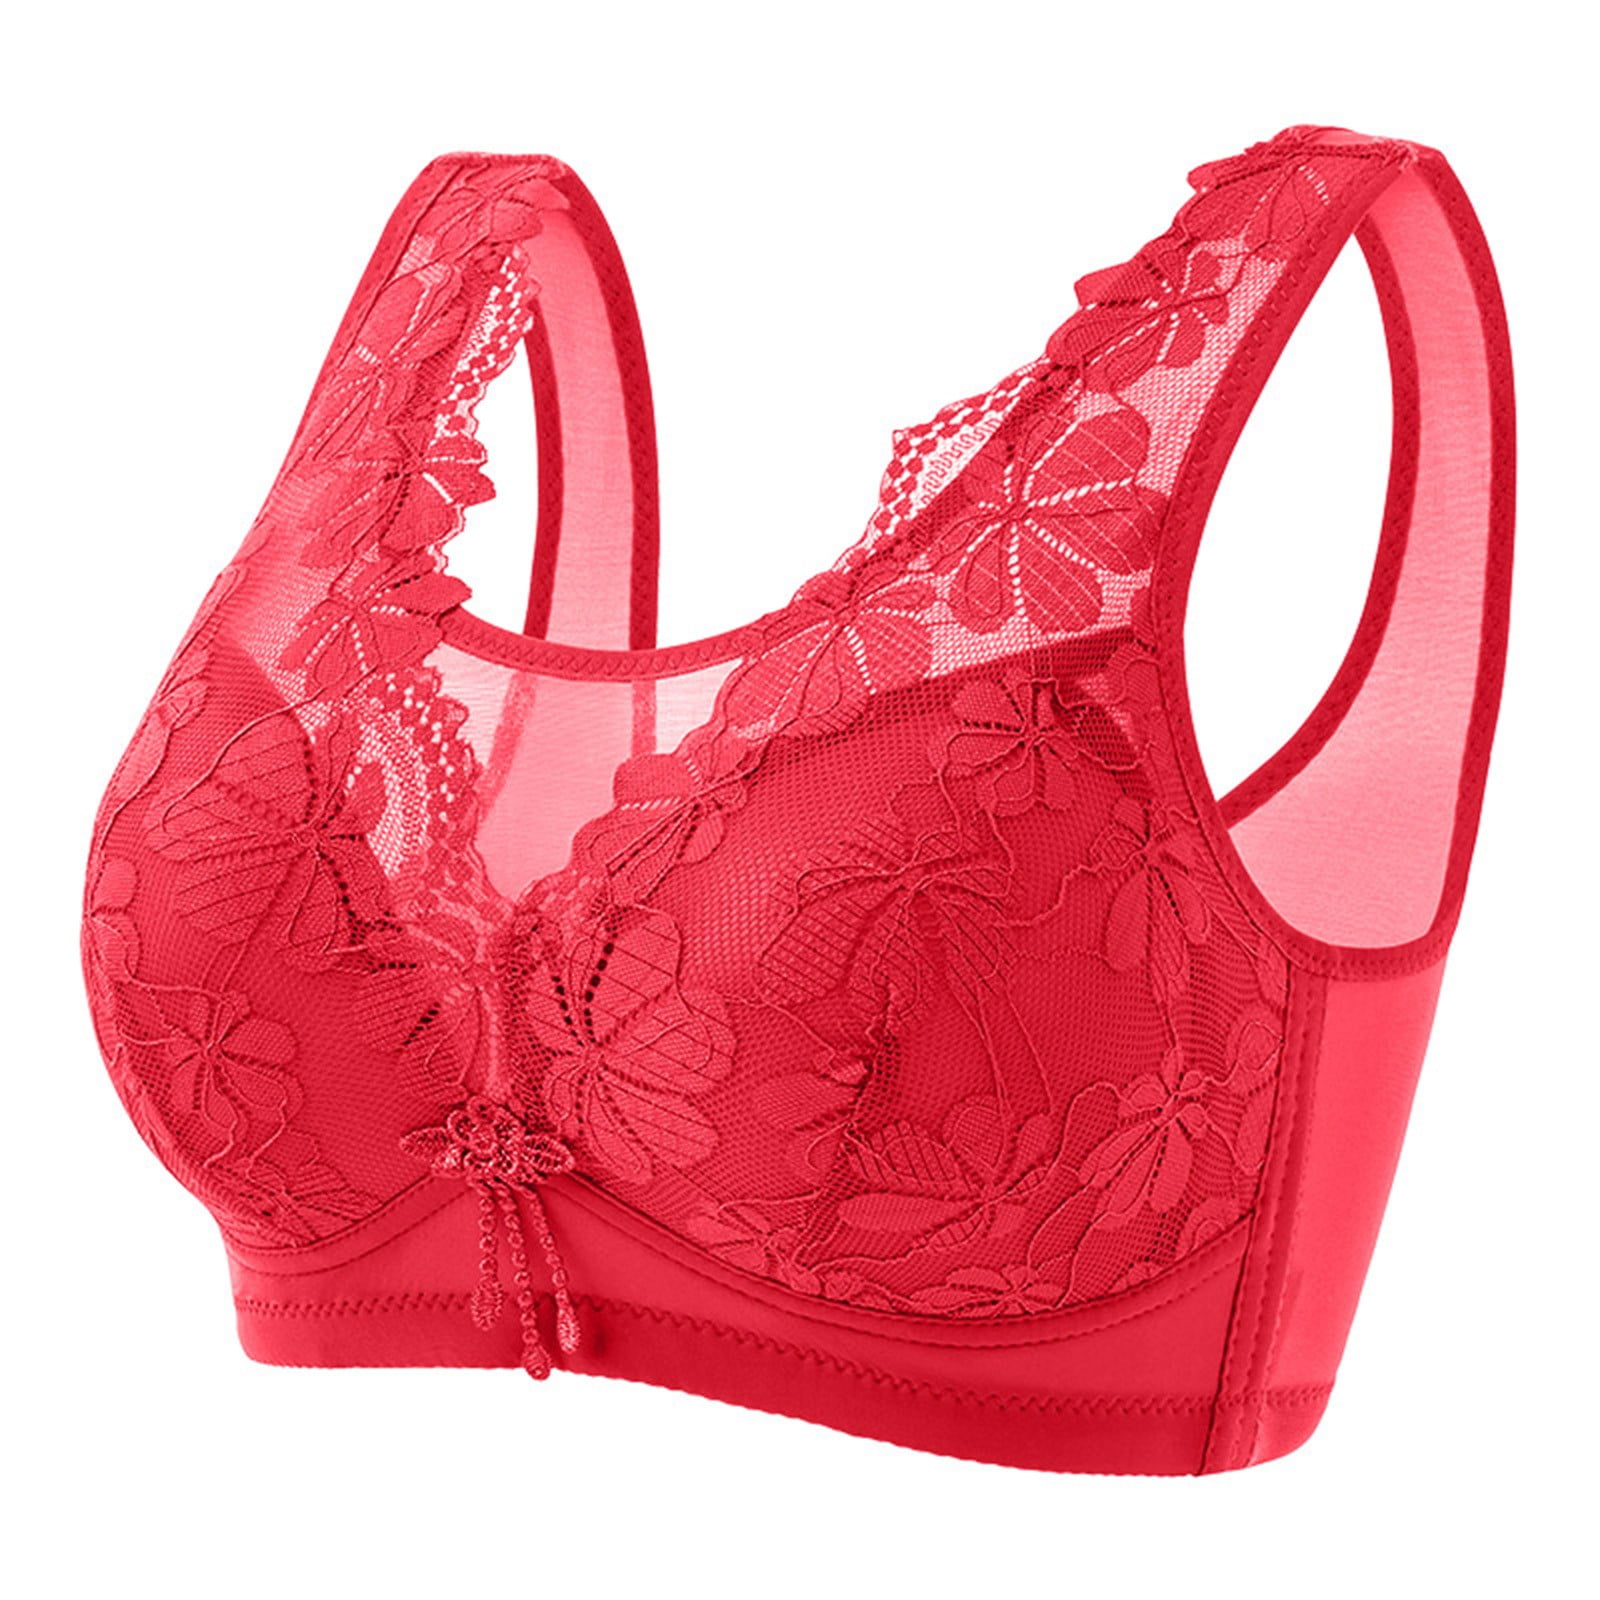 Spandex Soft and Comfortable Non-Pushup Bra For Women - Red - VAJRed